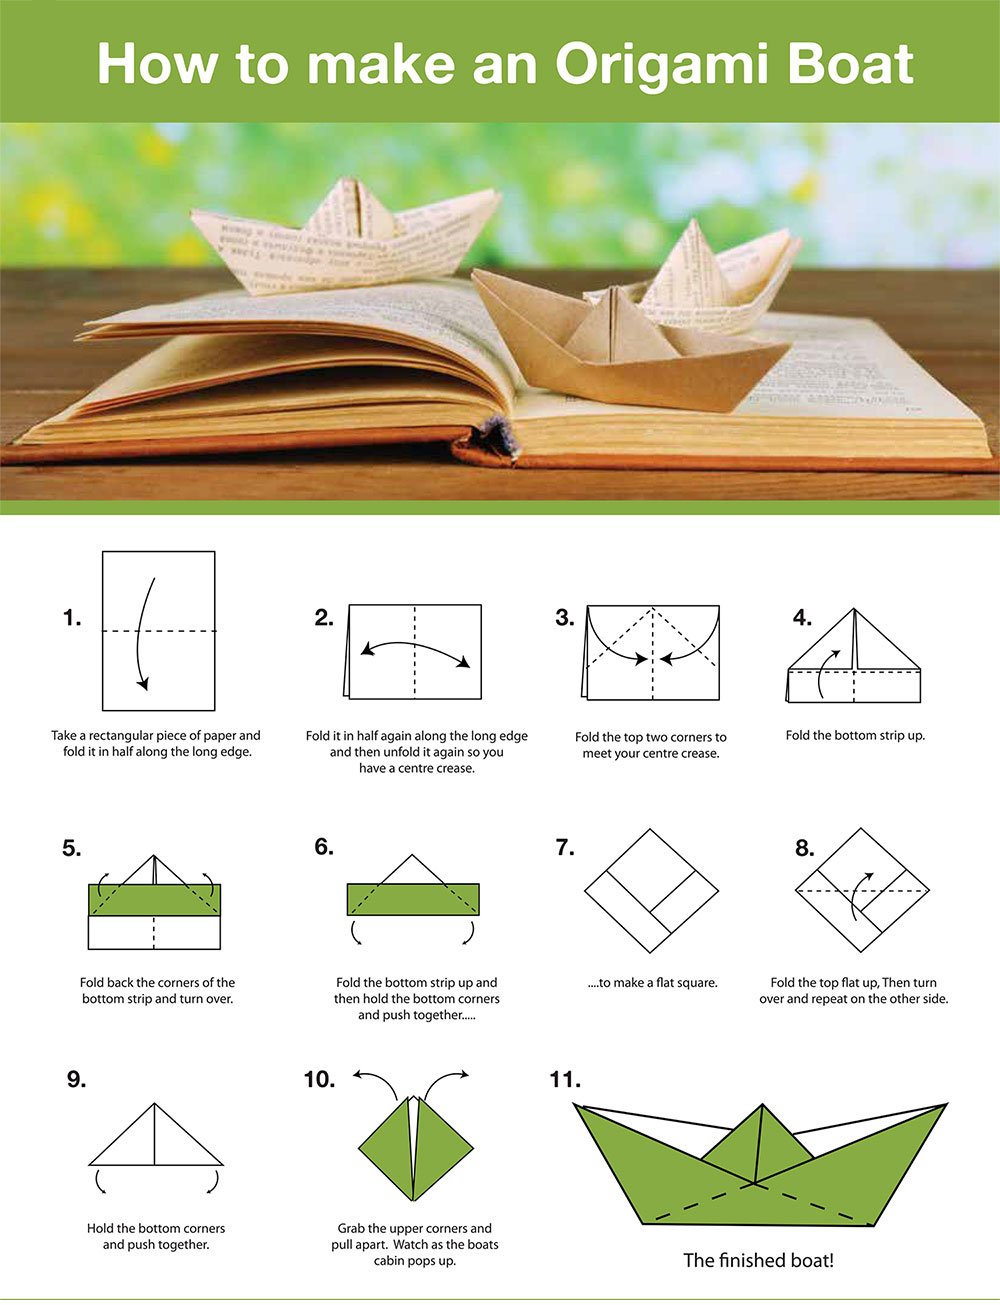 How To Build an Origami Boat